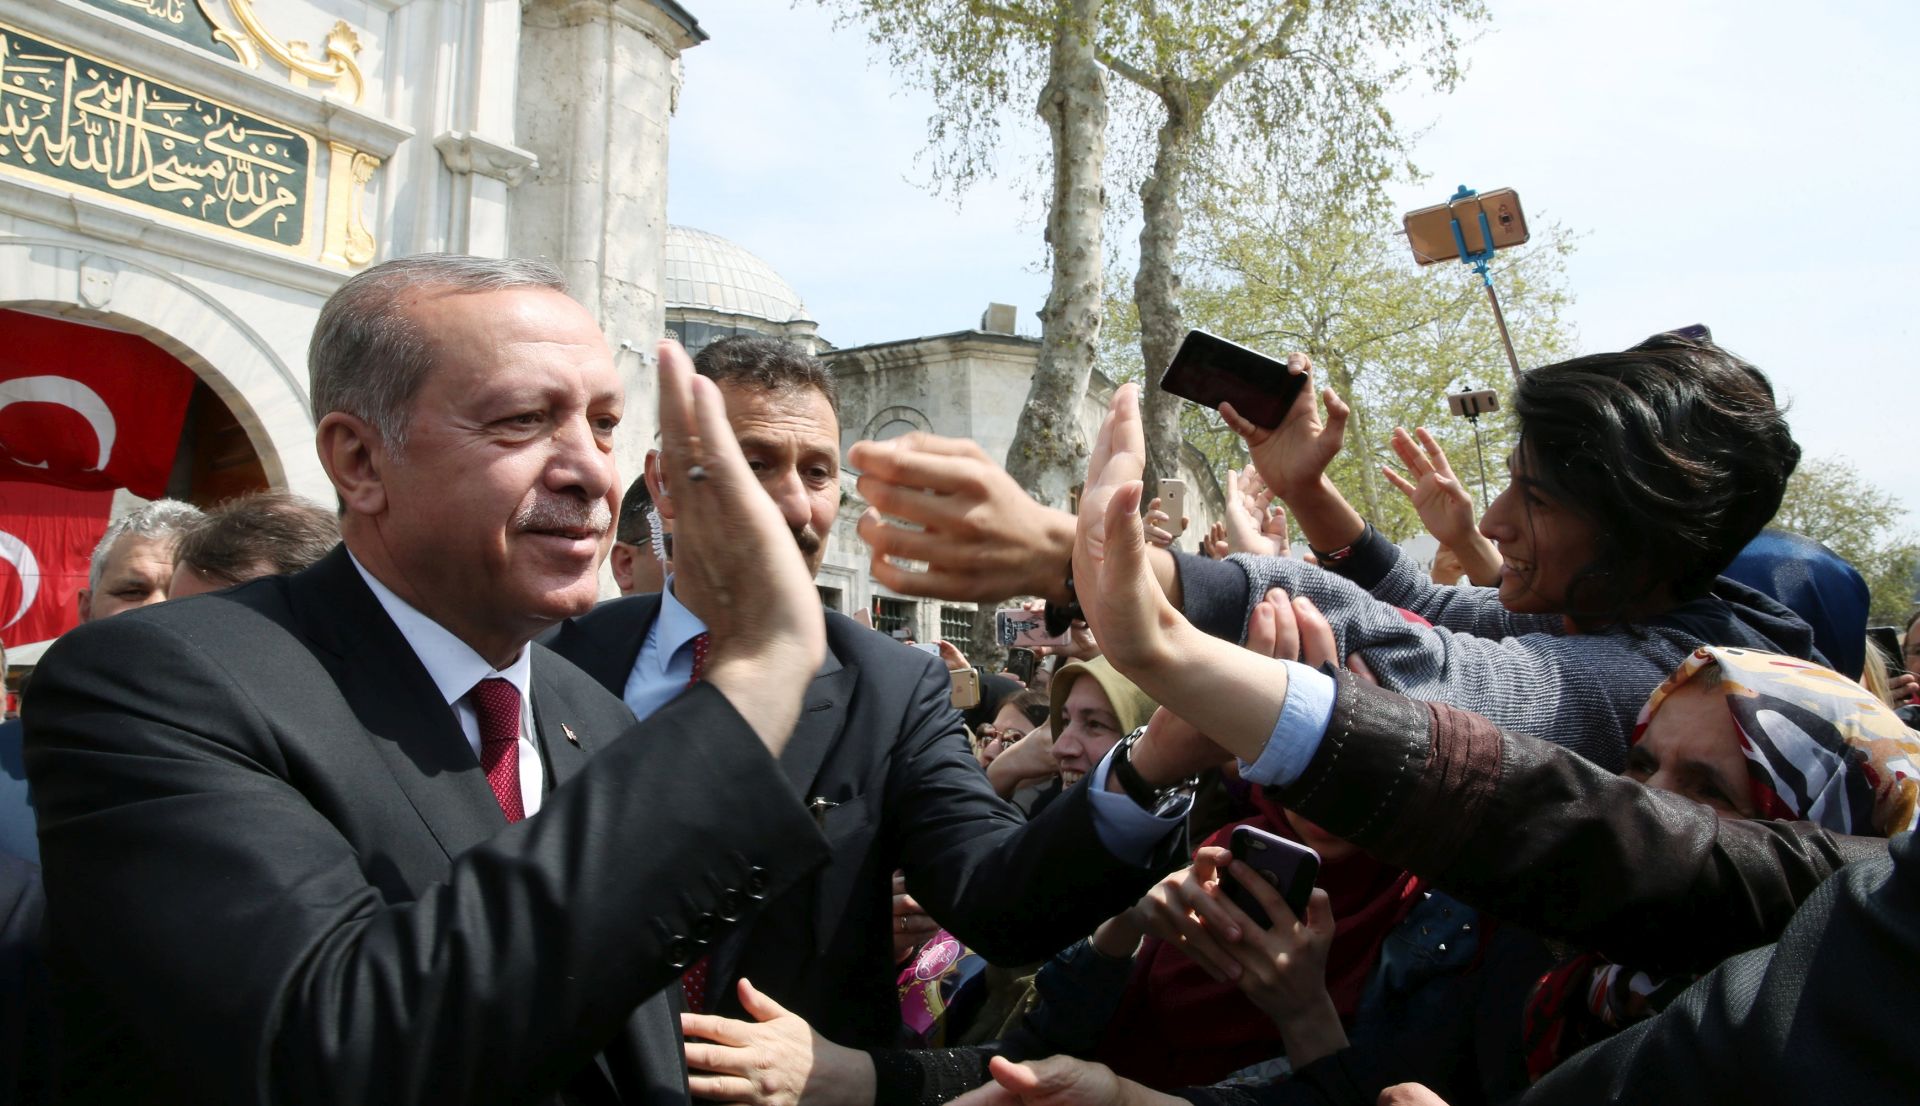 epa05912233 A handout photo made available by Turkish President Press office shows Turkish President Recep Tayyip Erdogan (L) greeting people after praying at Eyup Sultan mosque, Istanbul, Turkey, 17 April 2017. Media reports Turkish President Erdogan won a narrow lead of the 'Yes' vote in unofficial results, 17 April 2017. The proposed reform, passed by Turkish parliament on 21 January, would change the country's parliamentarian system of governance into a presidential one, which the opposition denounced as giving more power to Turkish President Erdogan.  EPA/TURKISH PRESIDENT PRESS OFFICE HANDOUT  HANDOUT EDITORIAL USE ONLY/NO SALES